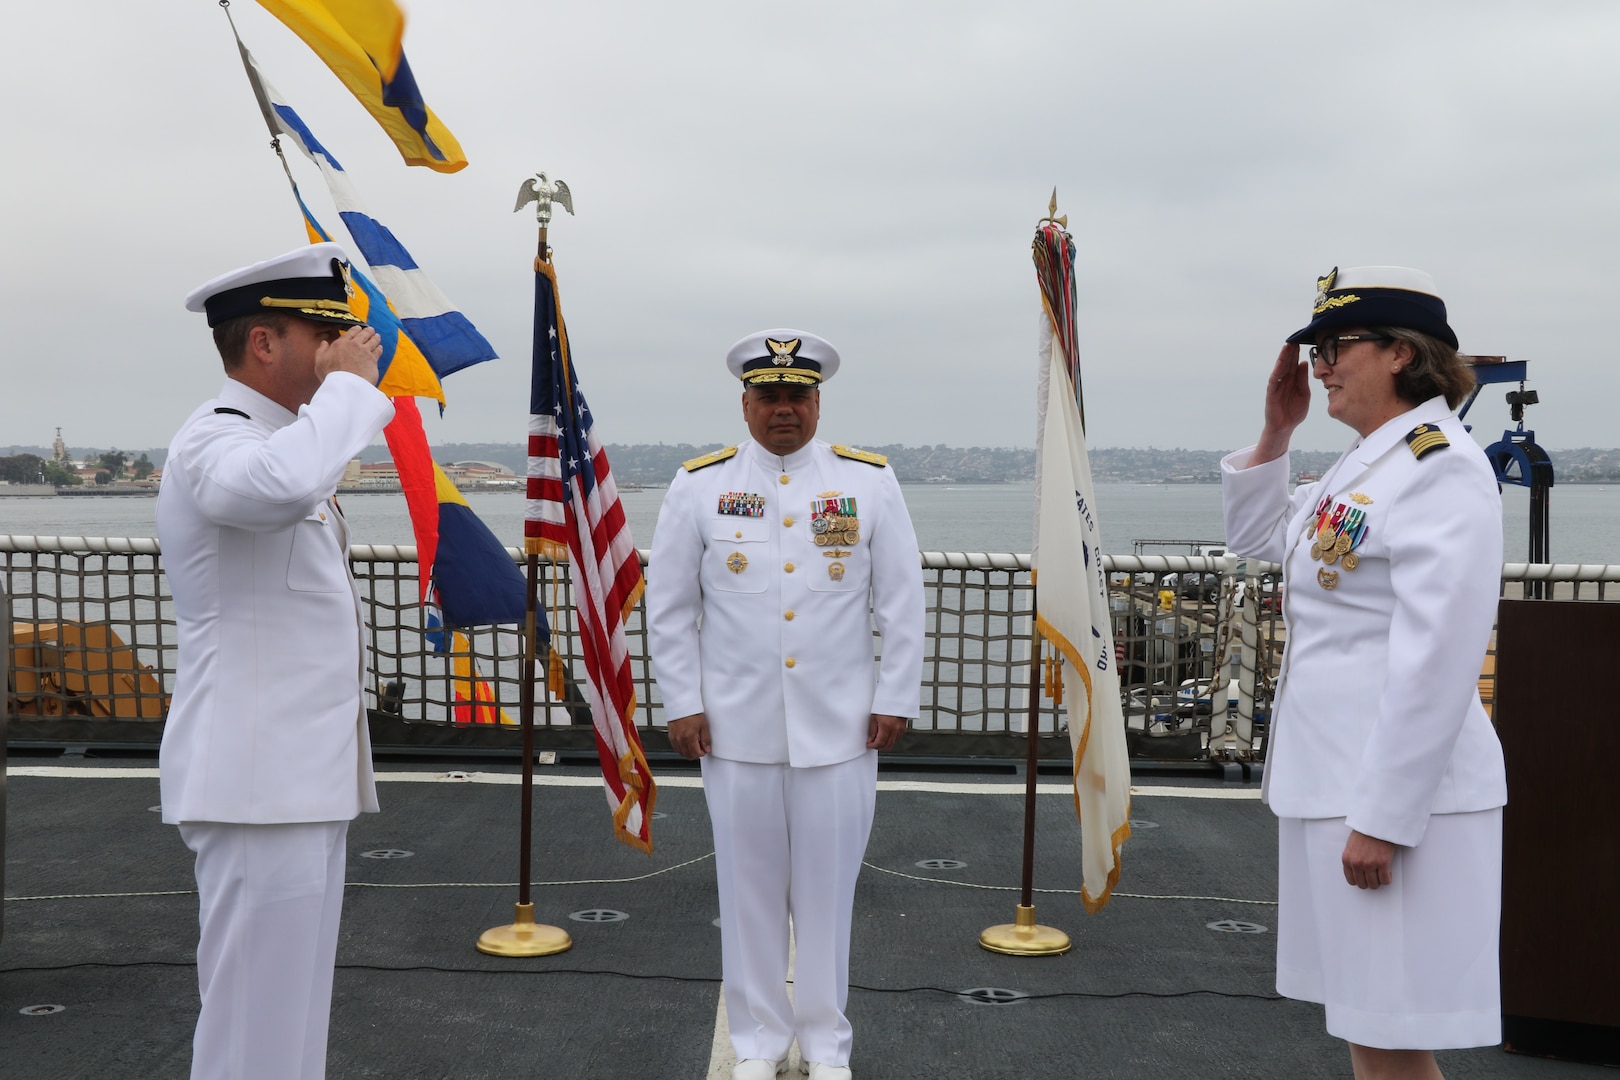 Capt. James O’Mara (left) and Capt. Rula Deisher (right) salute each other during the U.S. Coast Guard Cutter Munro’s (WMSL 755) change of command ceremony in San Diego, May 30, 2024. Vice Adm. Andrew J. Tiongson, Commander, U.S. Coast Guard Pacific Area, presided over the ceremony in which O’Mara relieved Deisher as Munro’s commanding officer. U.S. Coast Guard photo by Ensign Samika Lewis.